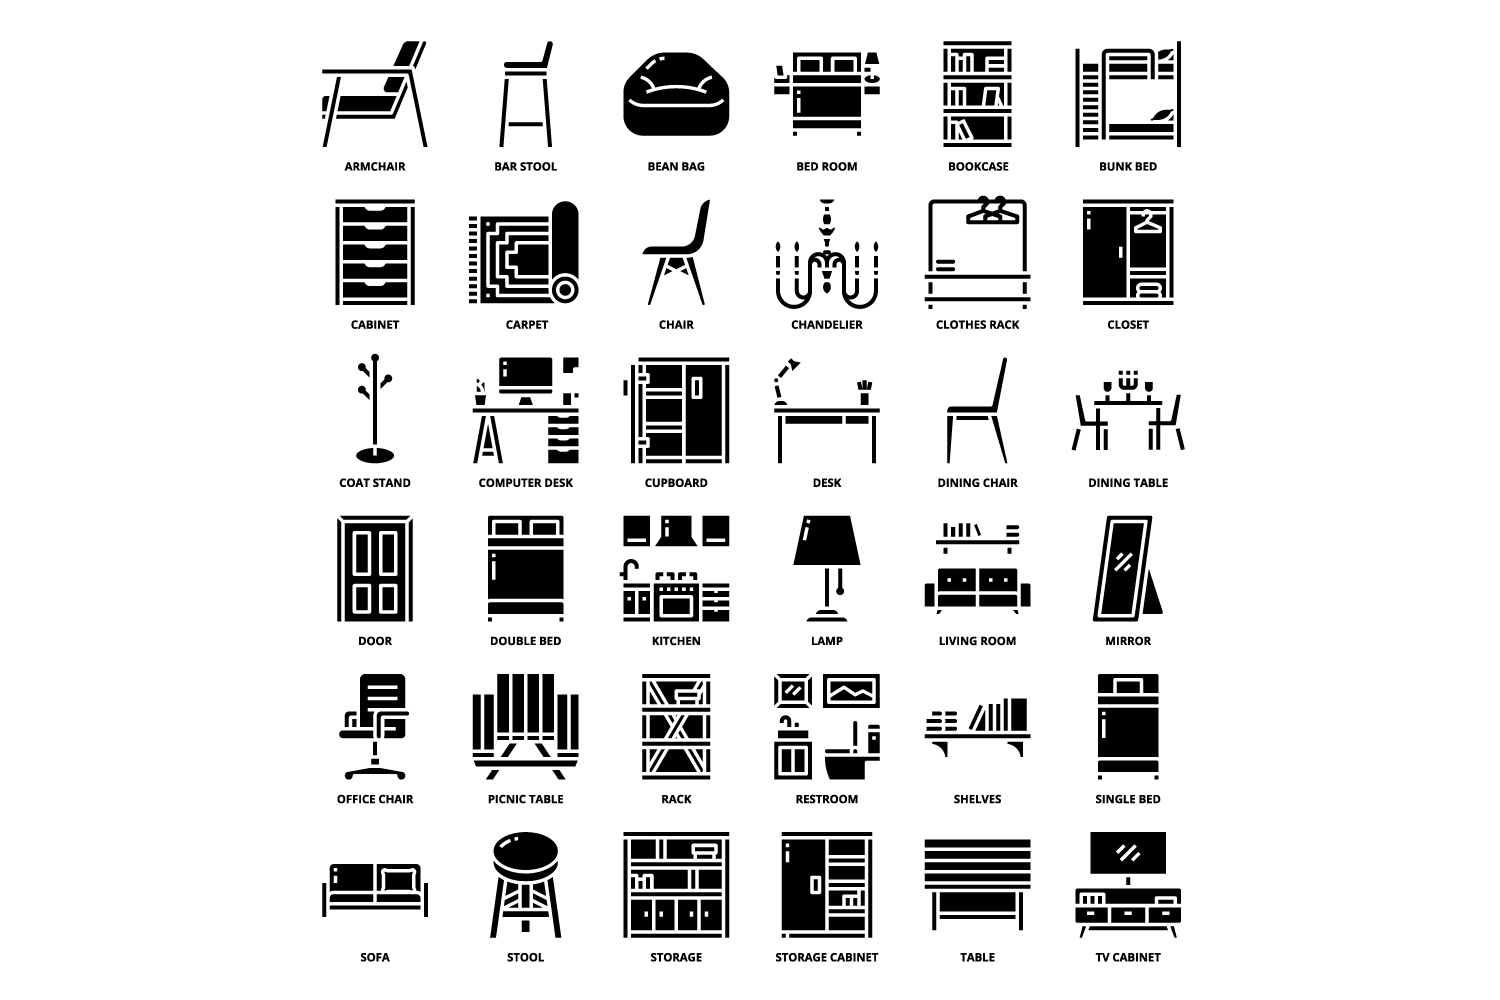 Black and white image of furniture and appliances.